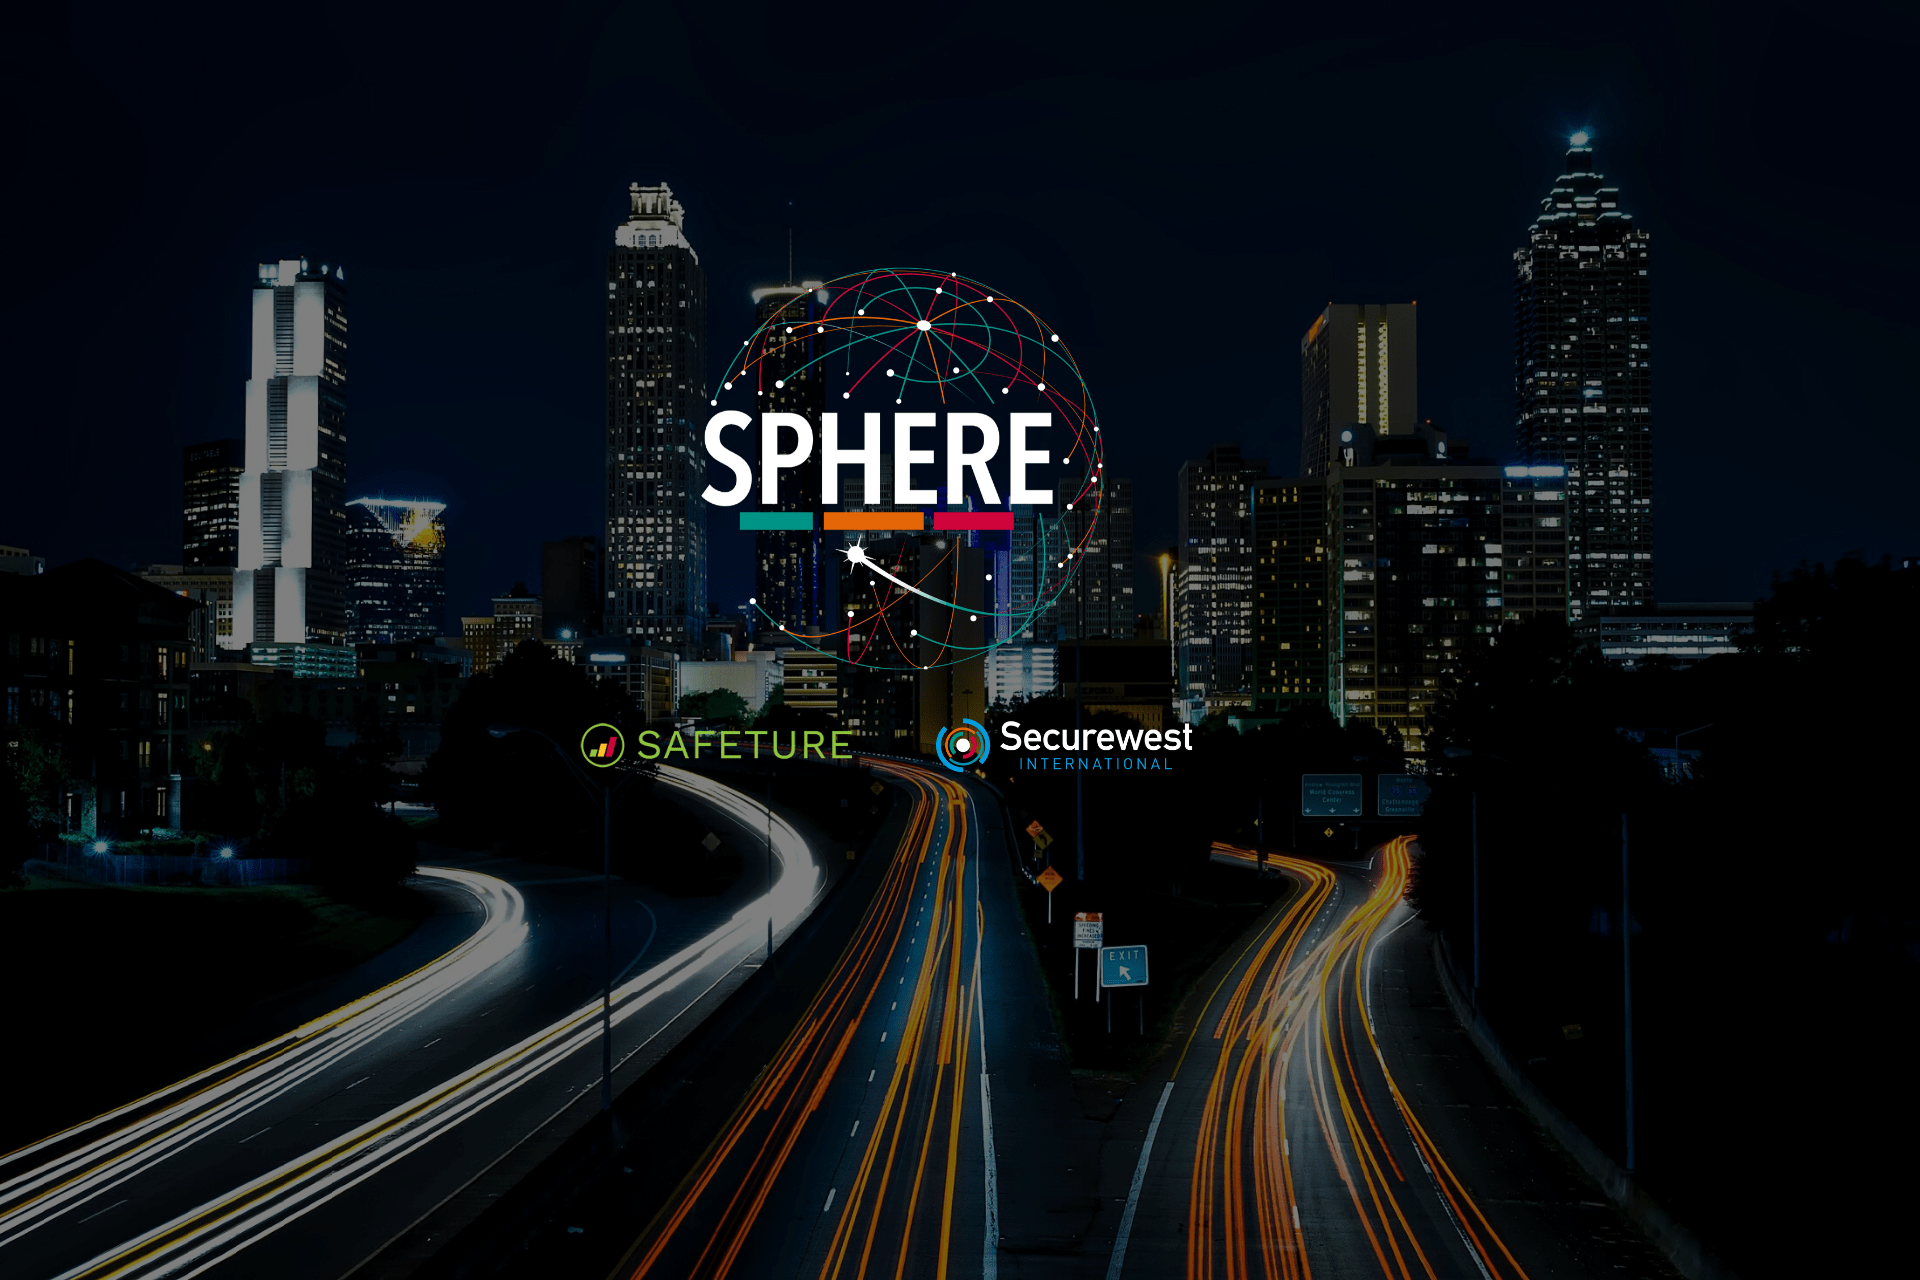 Sphere logo and partners safeture and securewest